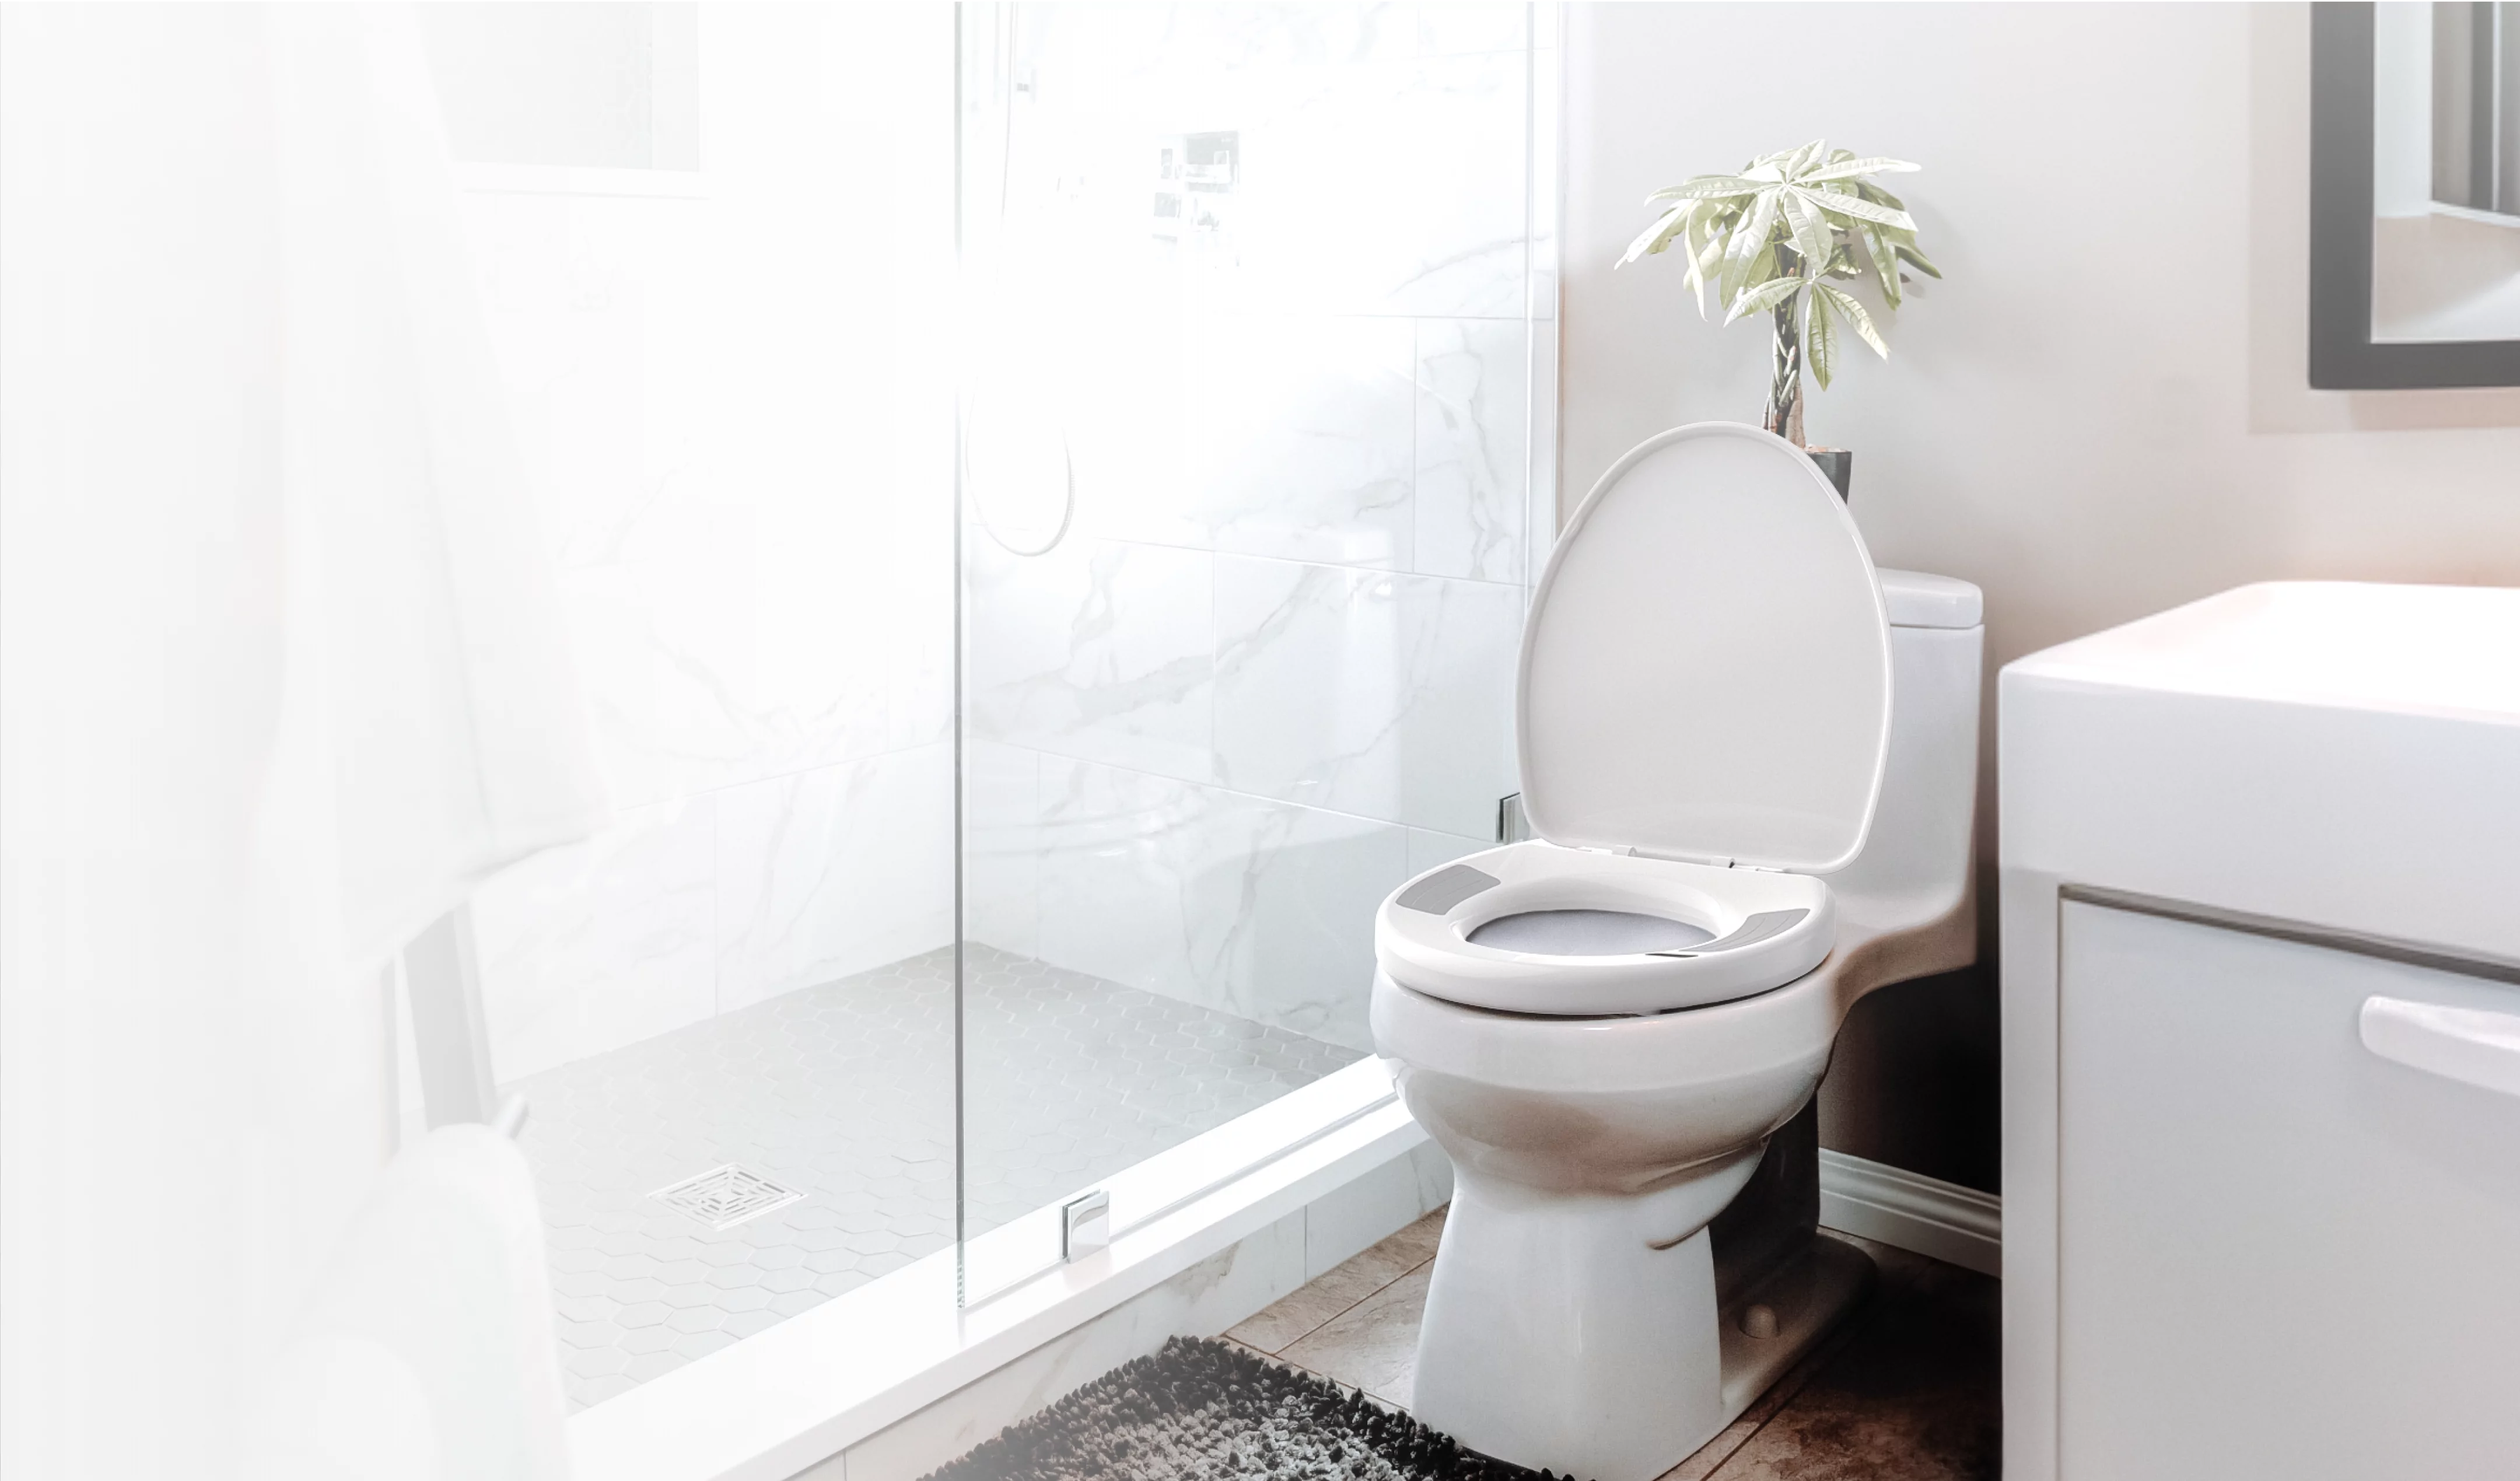 A bathroom showing the casana toilet seat installed